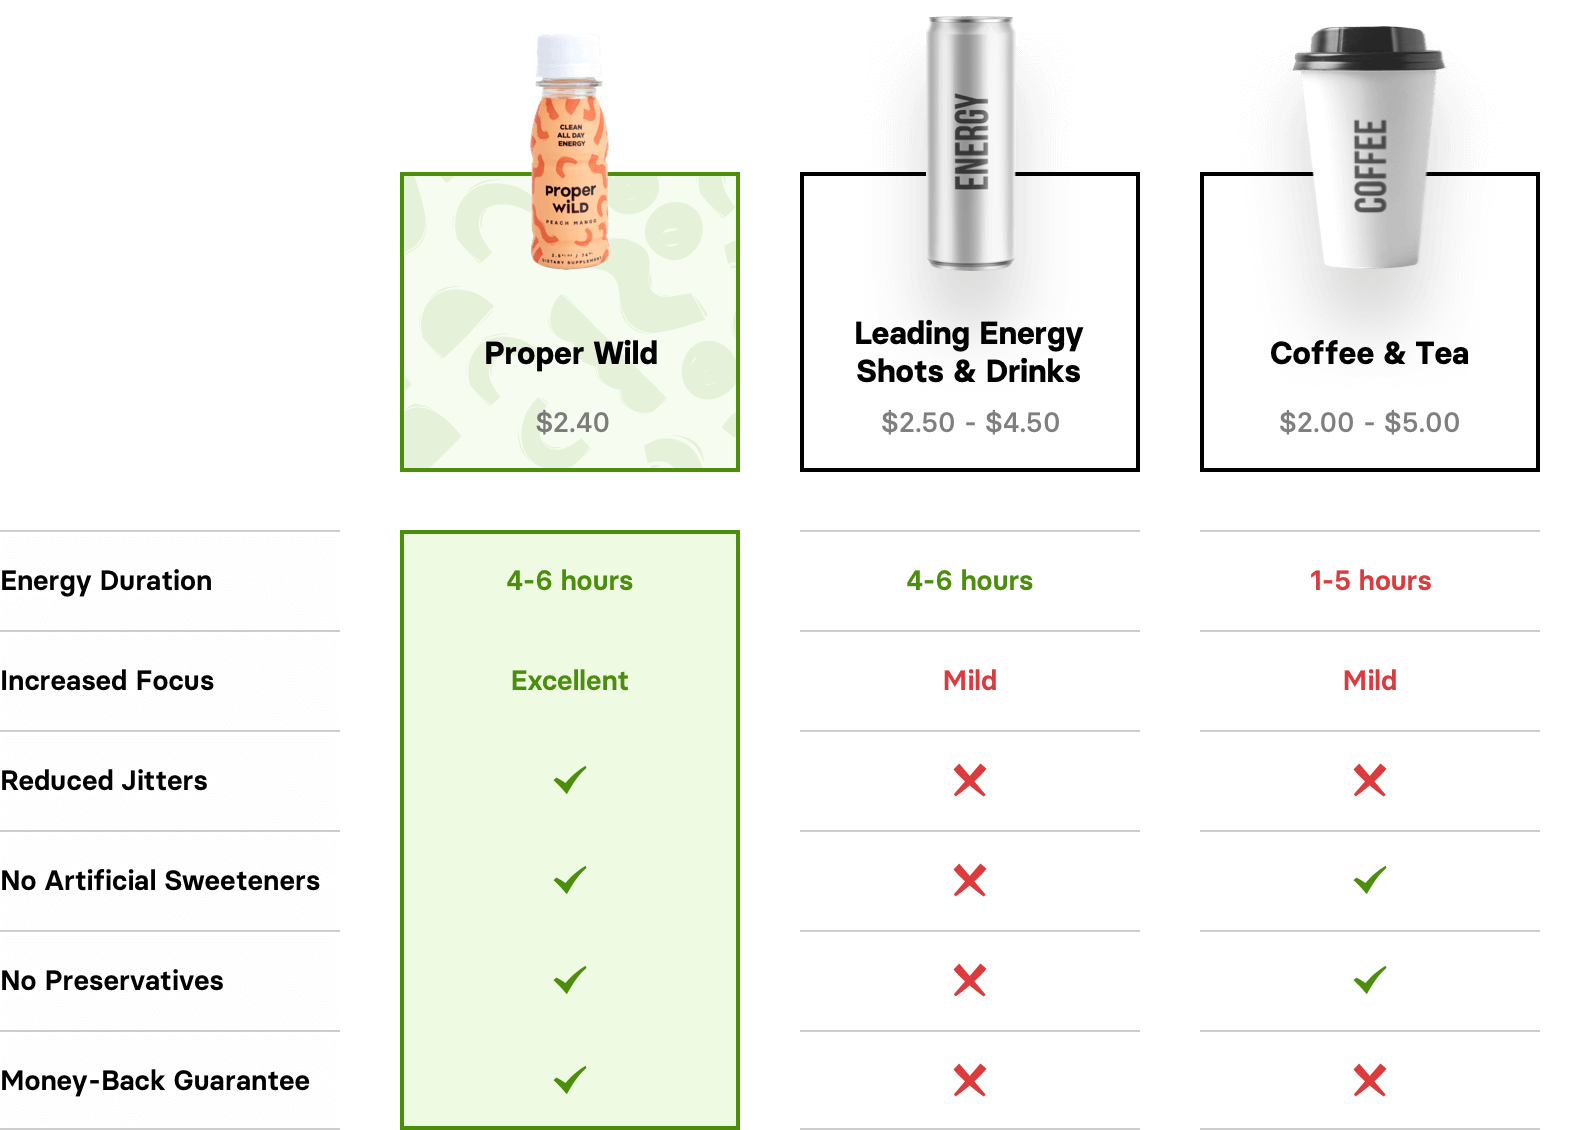 A comparison chart that compares Proper Wild with leading energy drinks, coffee and tea. Energy duration, Proper Wild four to six hours, leading energy shots and drinks four to six hours, coffee and tea one to five hours. Increased focus, Proper Wild excellent, leading energy shots and drinks mild, coffe and tea mild. Reduced jitters, Proper Wild yes, leading energy shots and drinks no, coffe and tea no. No artificial sweeteners, Proper Wild yes, leading energy shots and drinks no, coffee and tea yes. No preservatives, Proper Wild yes, leading energy shots and drinks no, coffee and tea yes. Money-Back Guarantee, Proper Wild yes, leading energy shots and drinks no, coffee and tea no.